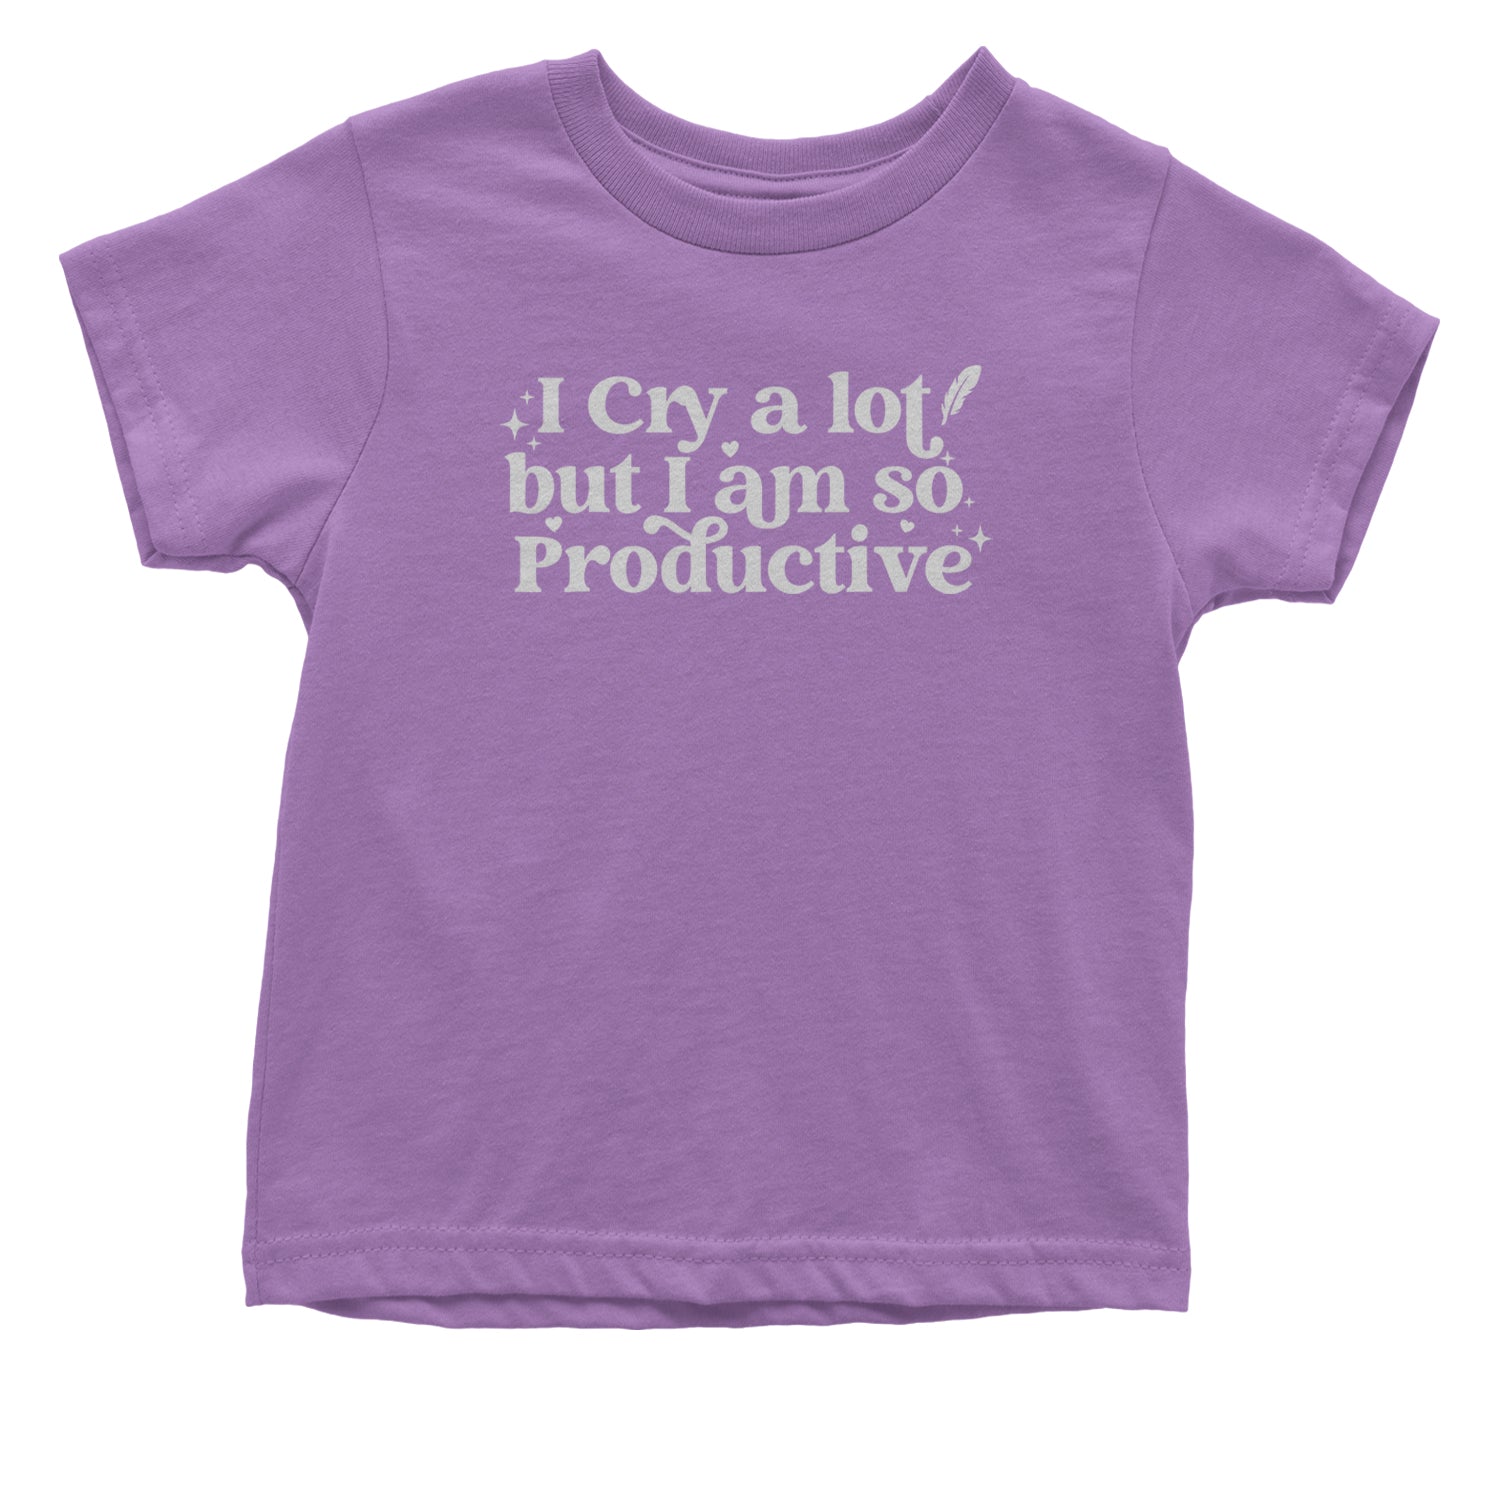 I Cry A Lot But I am So Productive TTPD Infant One-Piece Romper Bodysuit and Toddler T-shirt